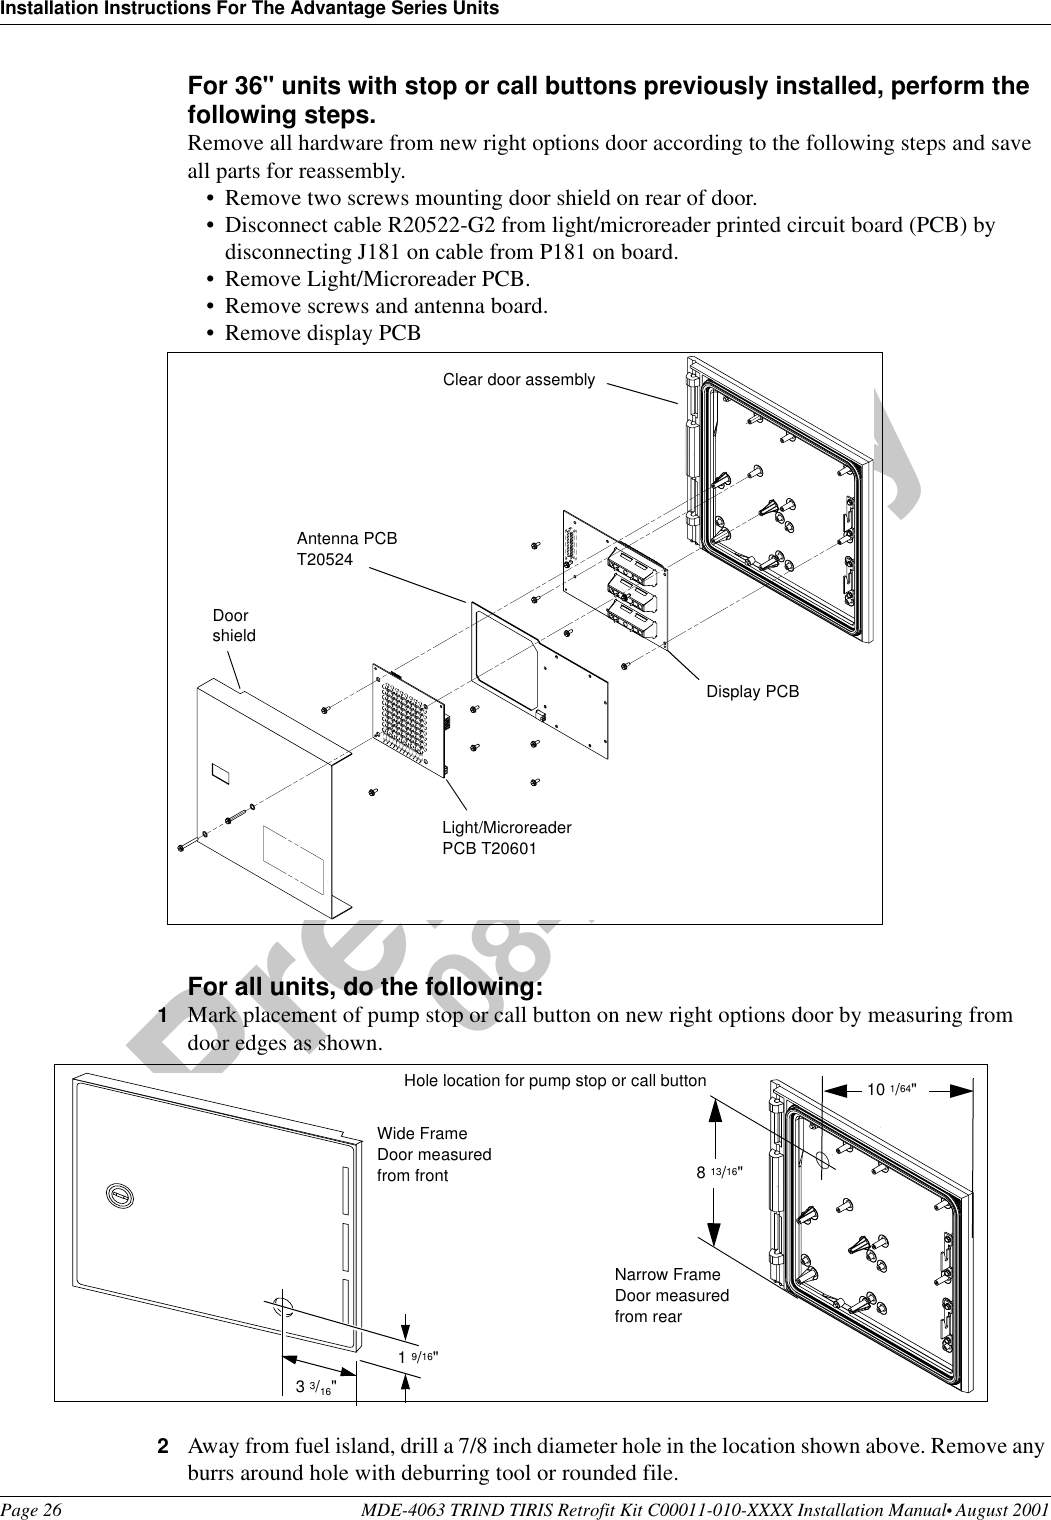 Installation Instructions For The Advantage Series UnitsPage 26 MDE-4063 TRIND TIRIS Retrofit Kit C00011-010-XXXX Installation Manual• August 2001Preliminary08-24-01For 36&quot; units with stop or call buttons previously installed, perform the following steps.Remove all hardware from new right options door according to the following steps and save all parts for reassembly.•Remove two screws mounting door shield on rear of door.•Disconnect cable R20522-G2 from light/microreader printed circuit board (PCB) by disconnecting J181 on cable from P181 on board.•Remove Light/Microreader PCB.•Remove screws and antenna board.•Remove display PCBFor all units, do the following:1Mark placement of pump stop or call button on new right options door by measuring from door edges as shown.2Away from fuel island, drill a 7/8 inch diameter hole in the location shown above. Remove any burrs around hole with deburring tool or rounded file.DoorshieldAntenna PCB T20524Light/Microreader PCB T20601Clear door assemblyDisplay PCB1 9/16&quot;3 3/16&quot;Hole location for pump stop or call button 10 1/64&quot;8 13/16&quot;Wide Frame Door measured from frontNarrow Frame Door measured from rear